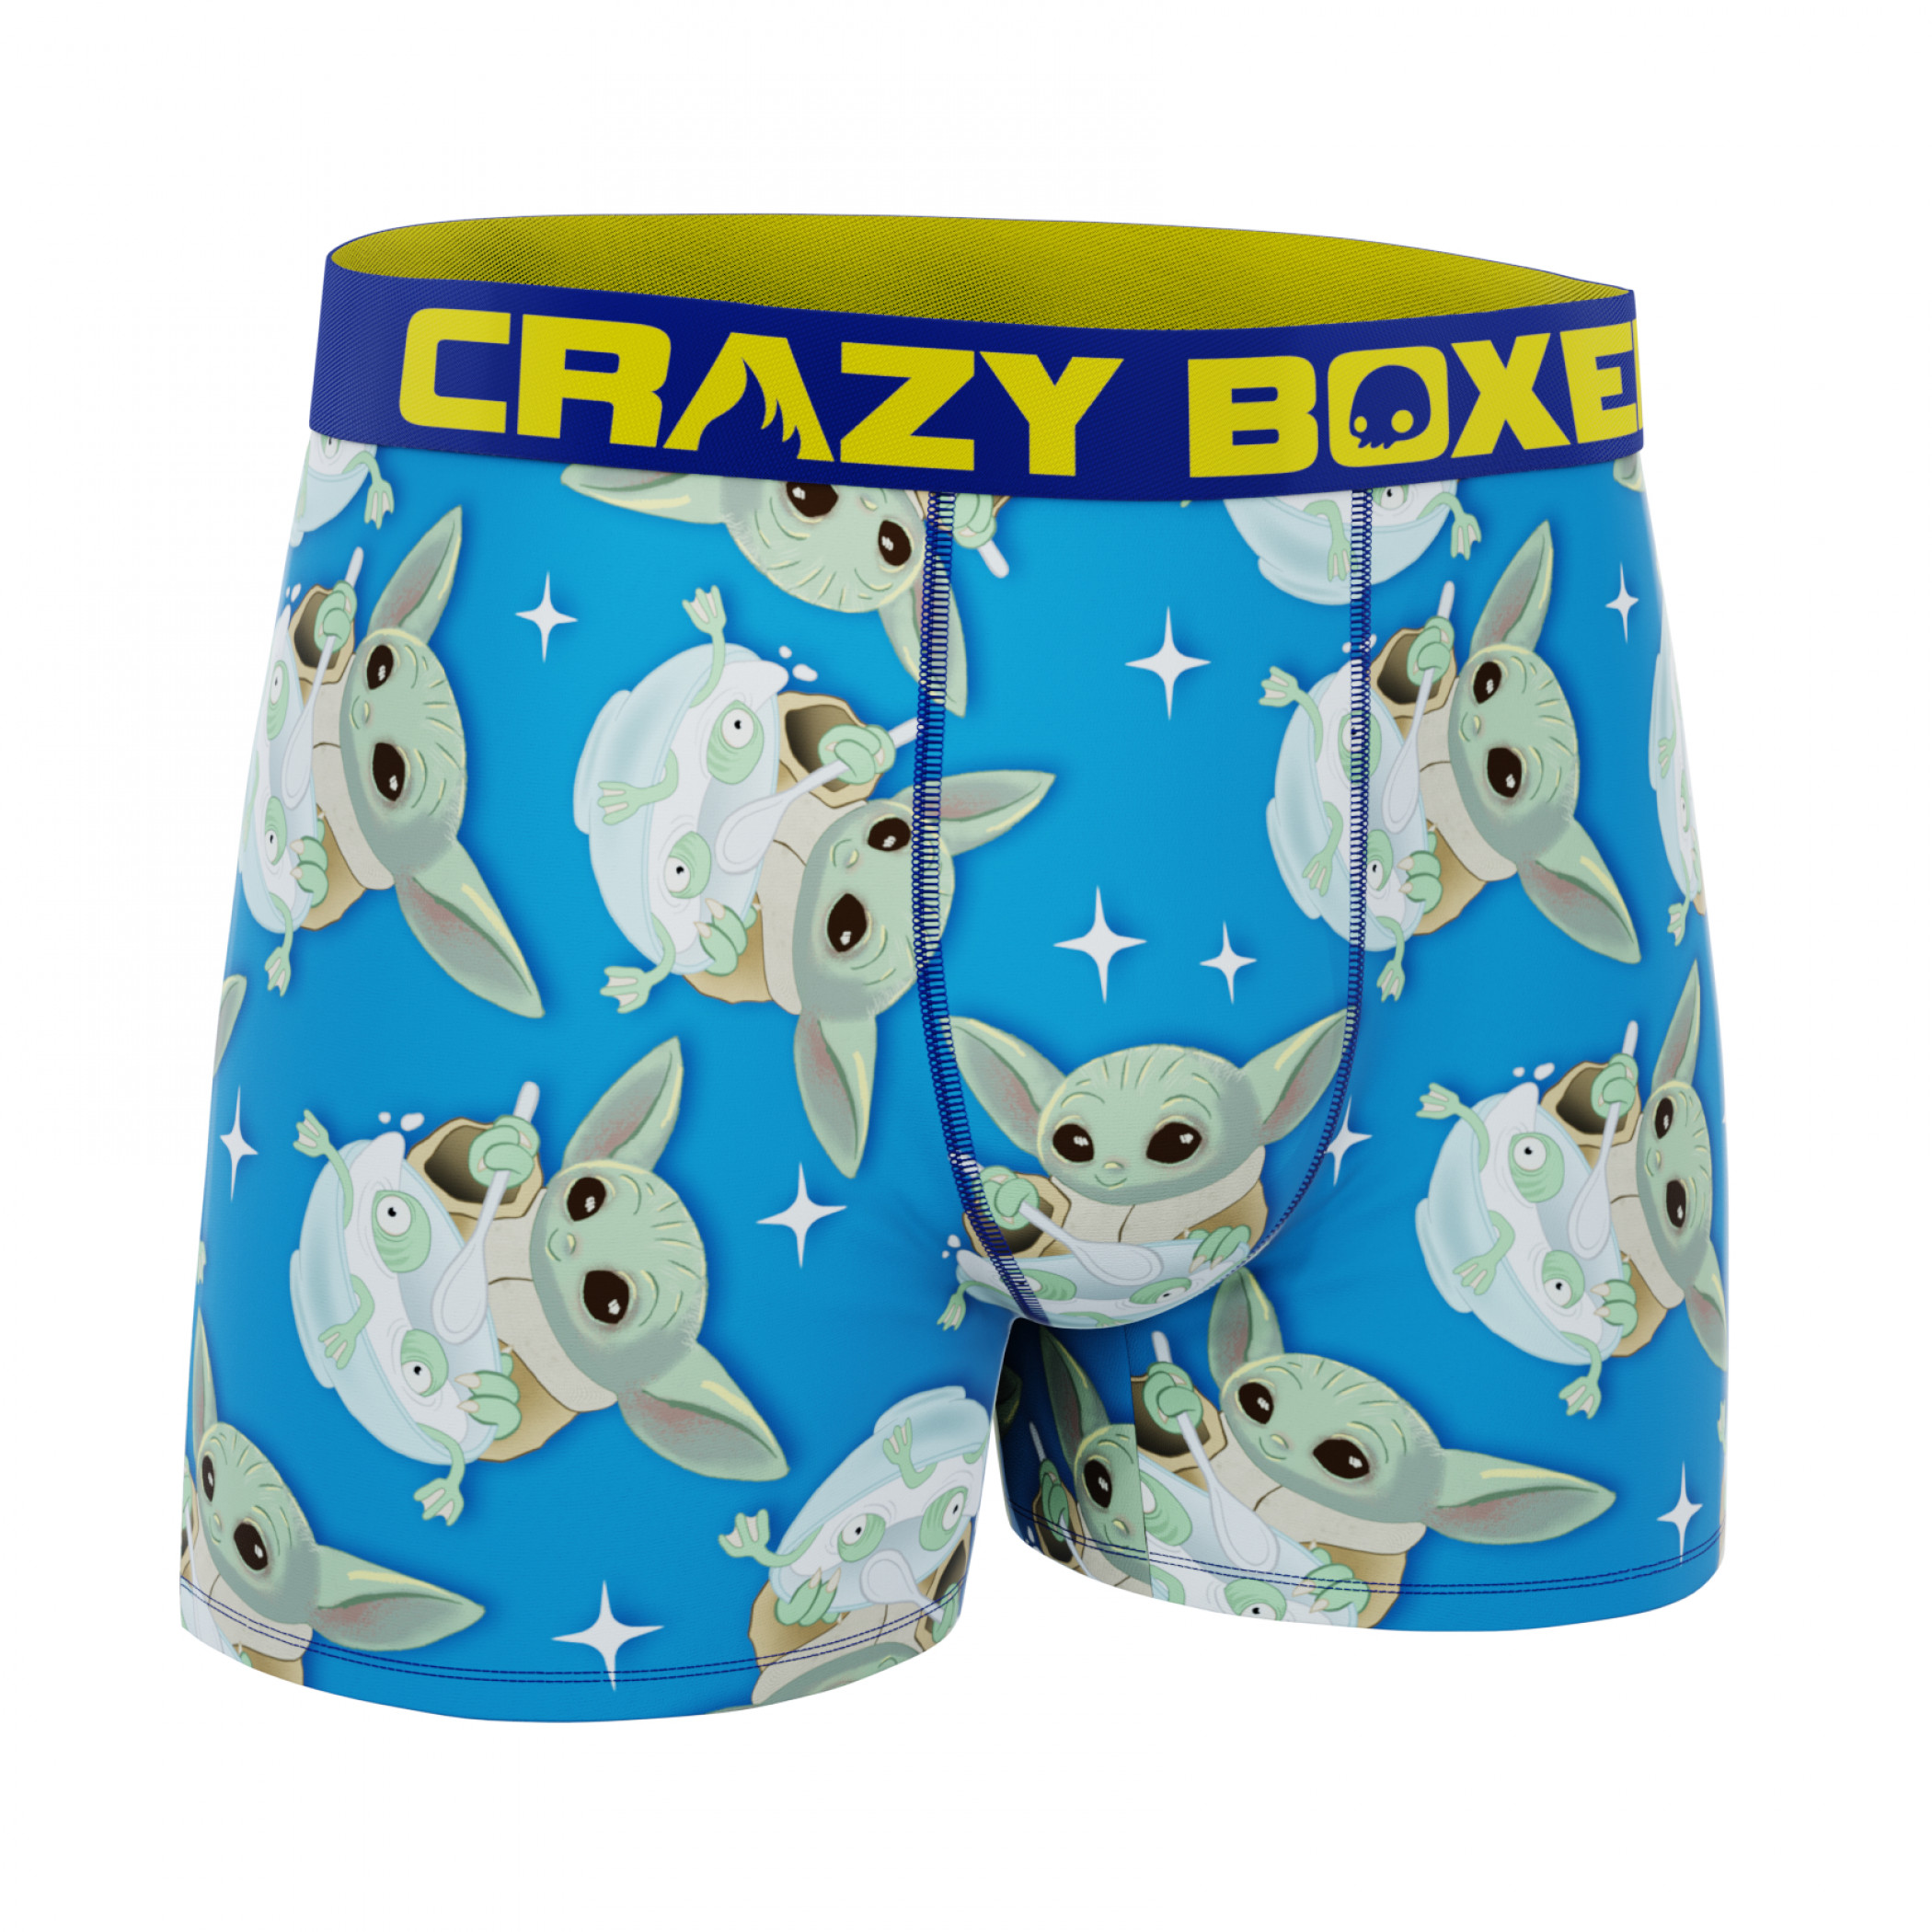 Crazy Boxers Star Wars The Child Grogu Boxer Briefs in Cereal Box